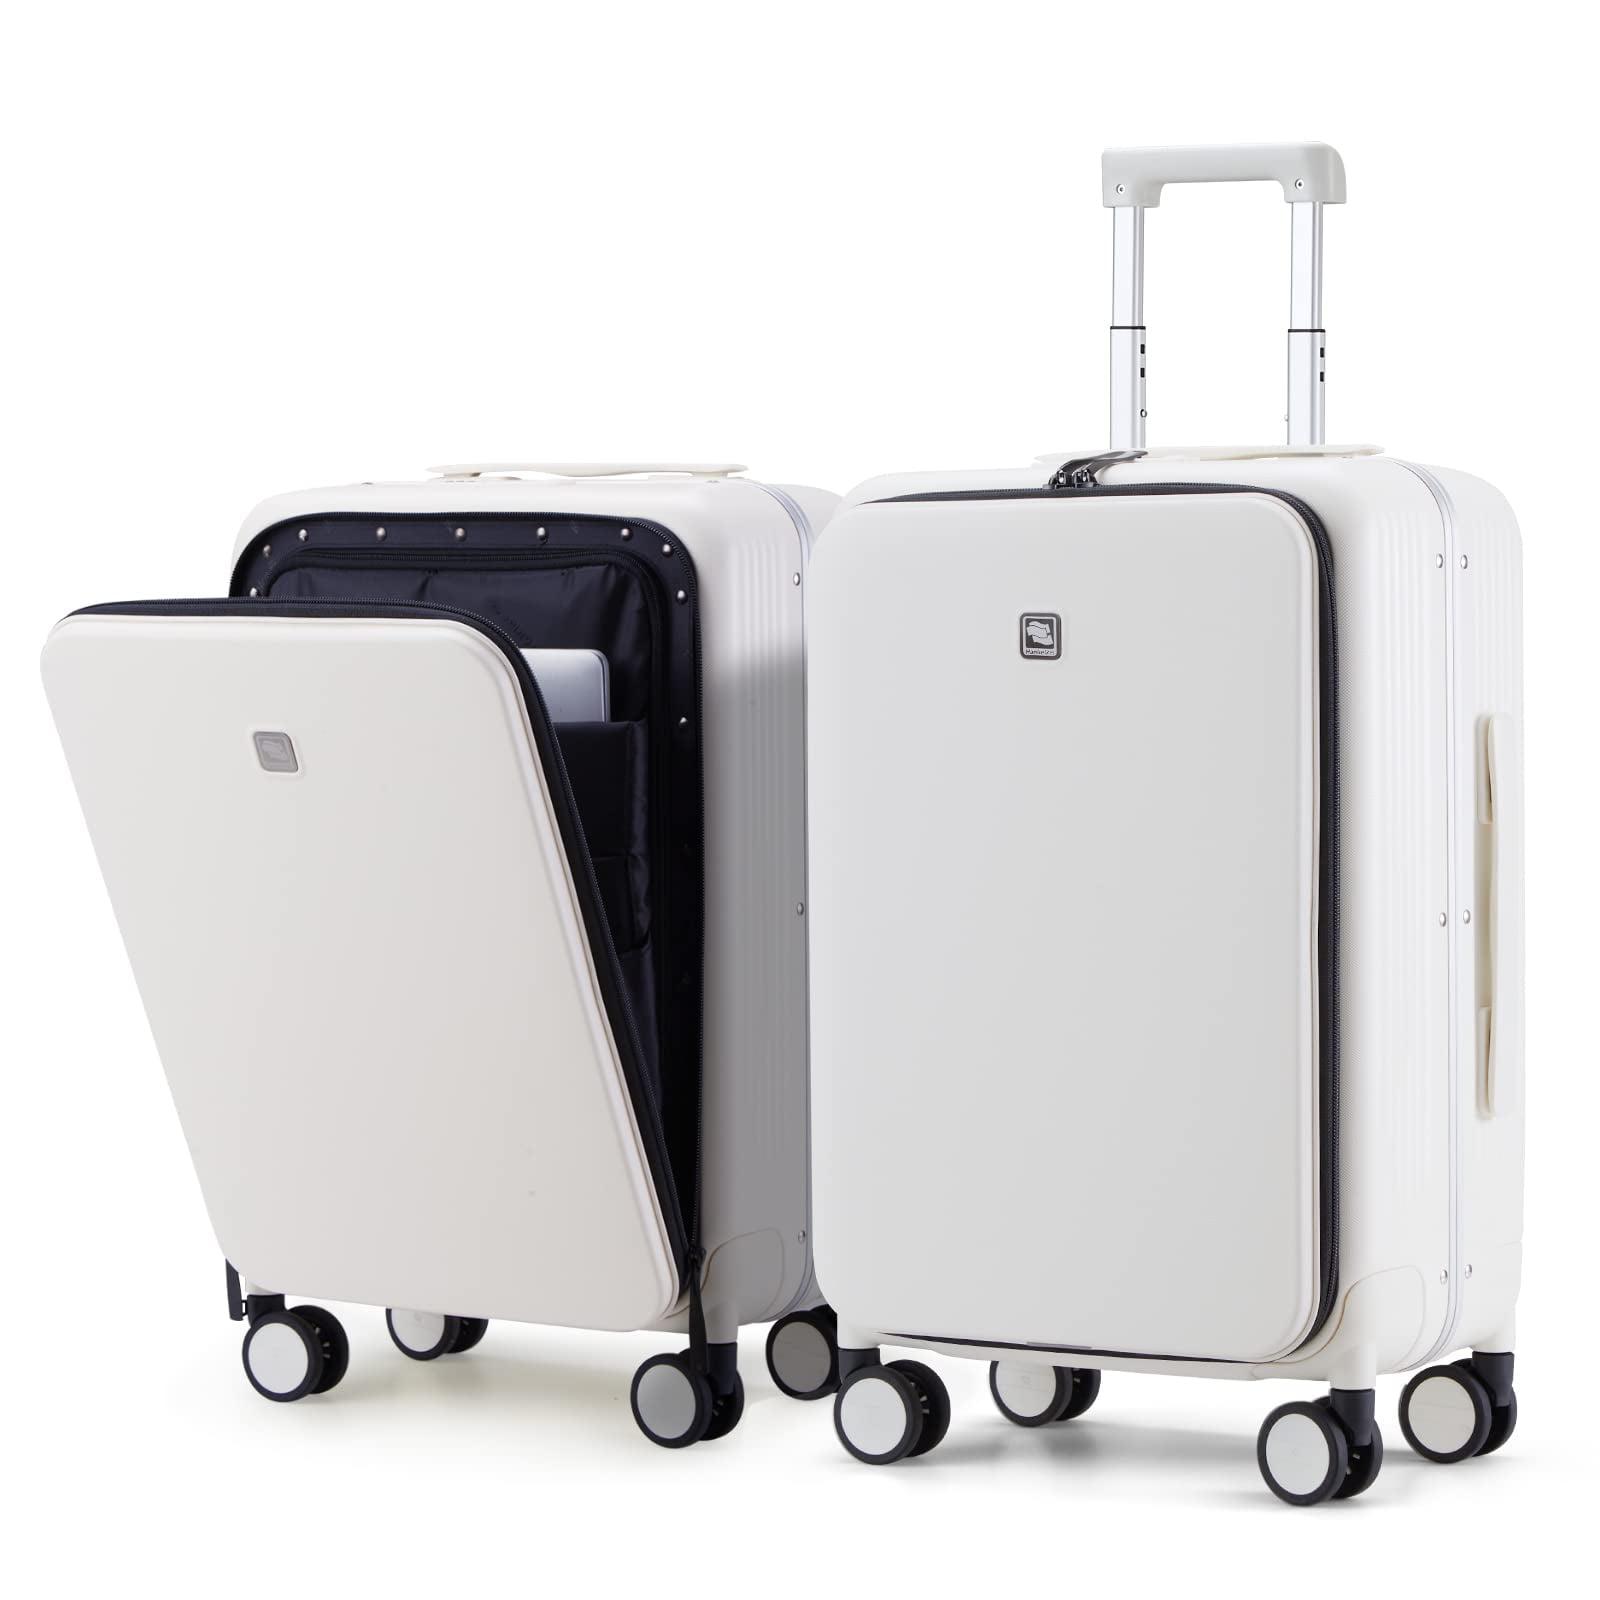 Hanke 20 Inch Carry On Luggage with Front Pocket Aluminum Frame （Can Not  Open in The Middle） Hard Shell Suitcases with Wheels Rolling Luggage  Suitcase